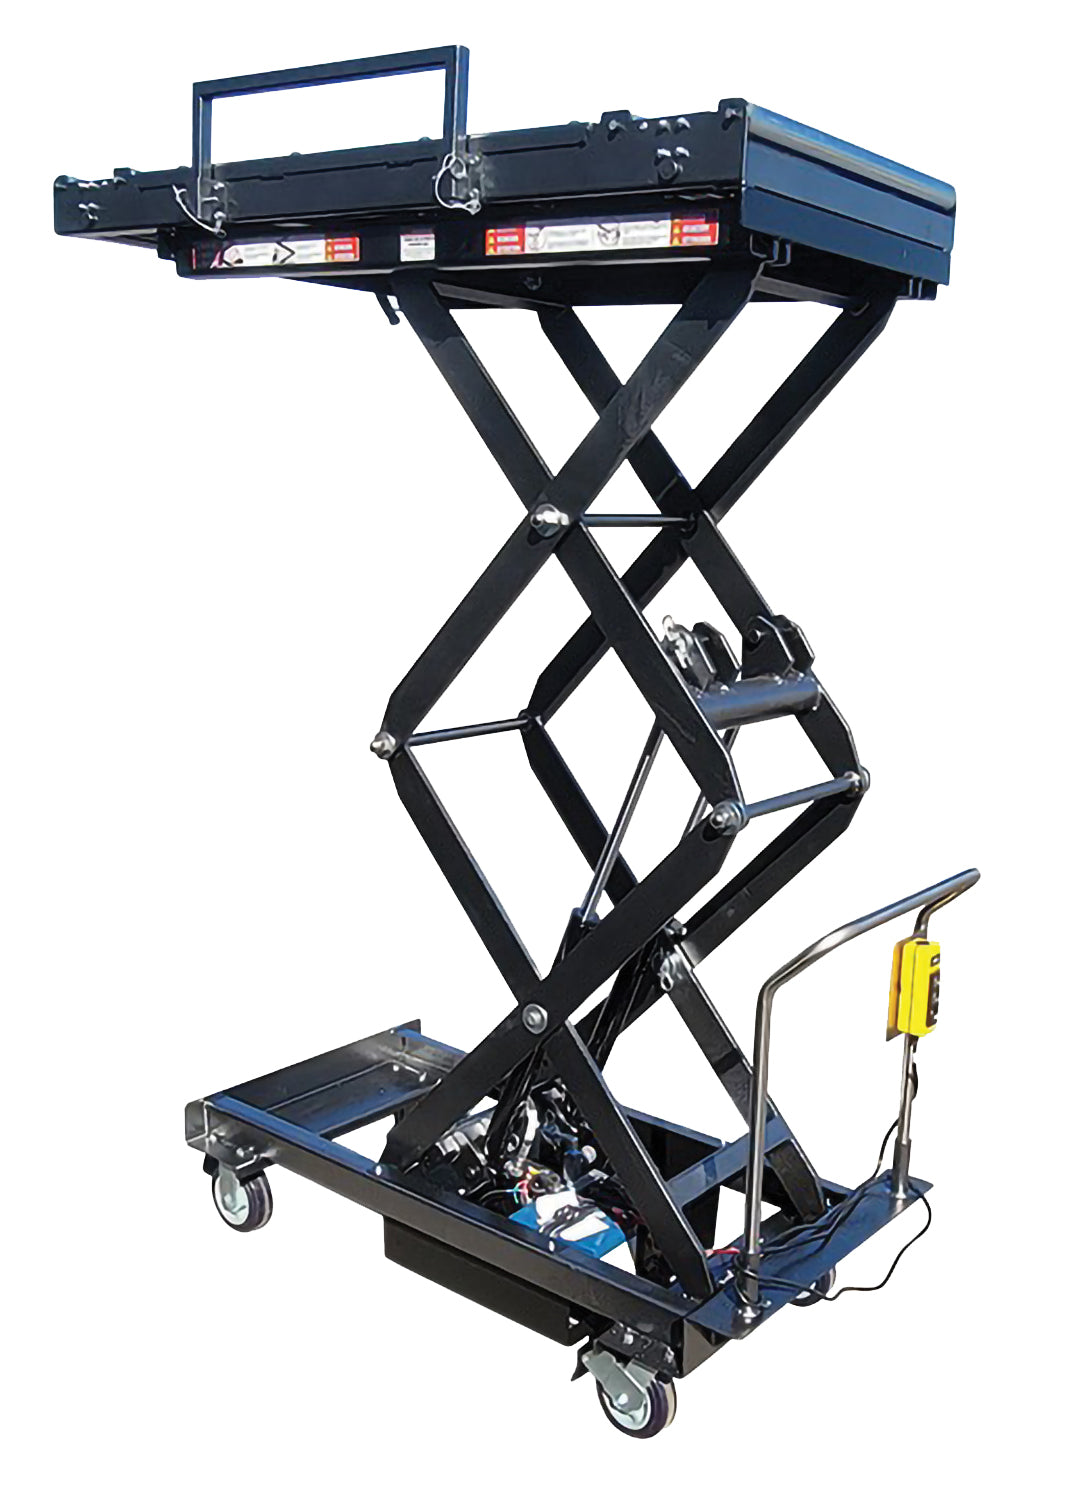 Powered Scissor Lift System HD 1000 MAX Multi-Directional Top